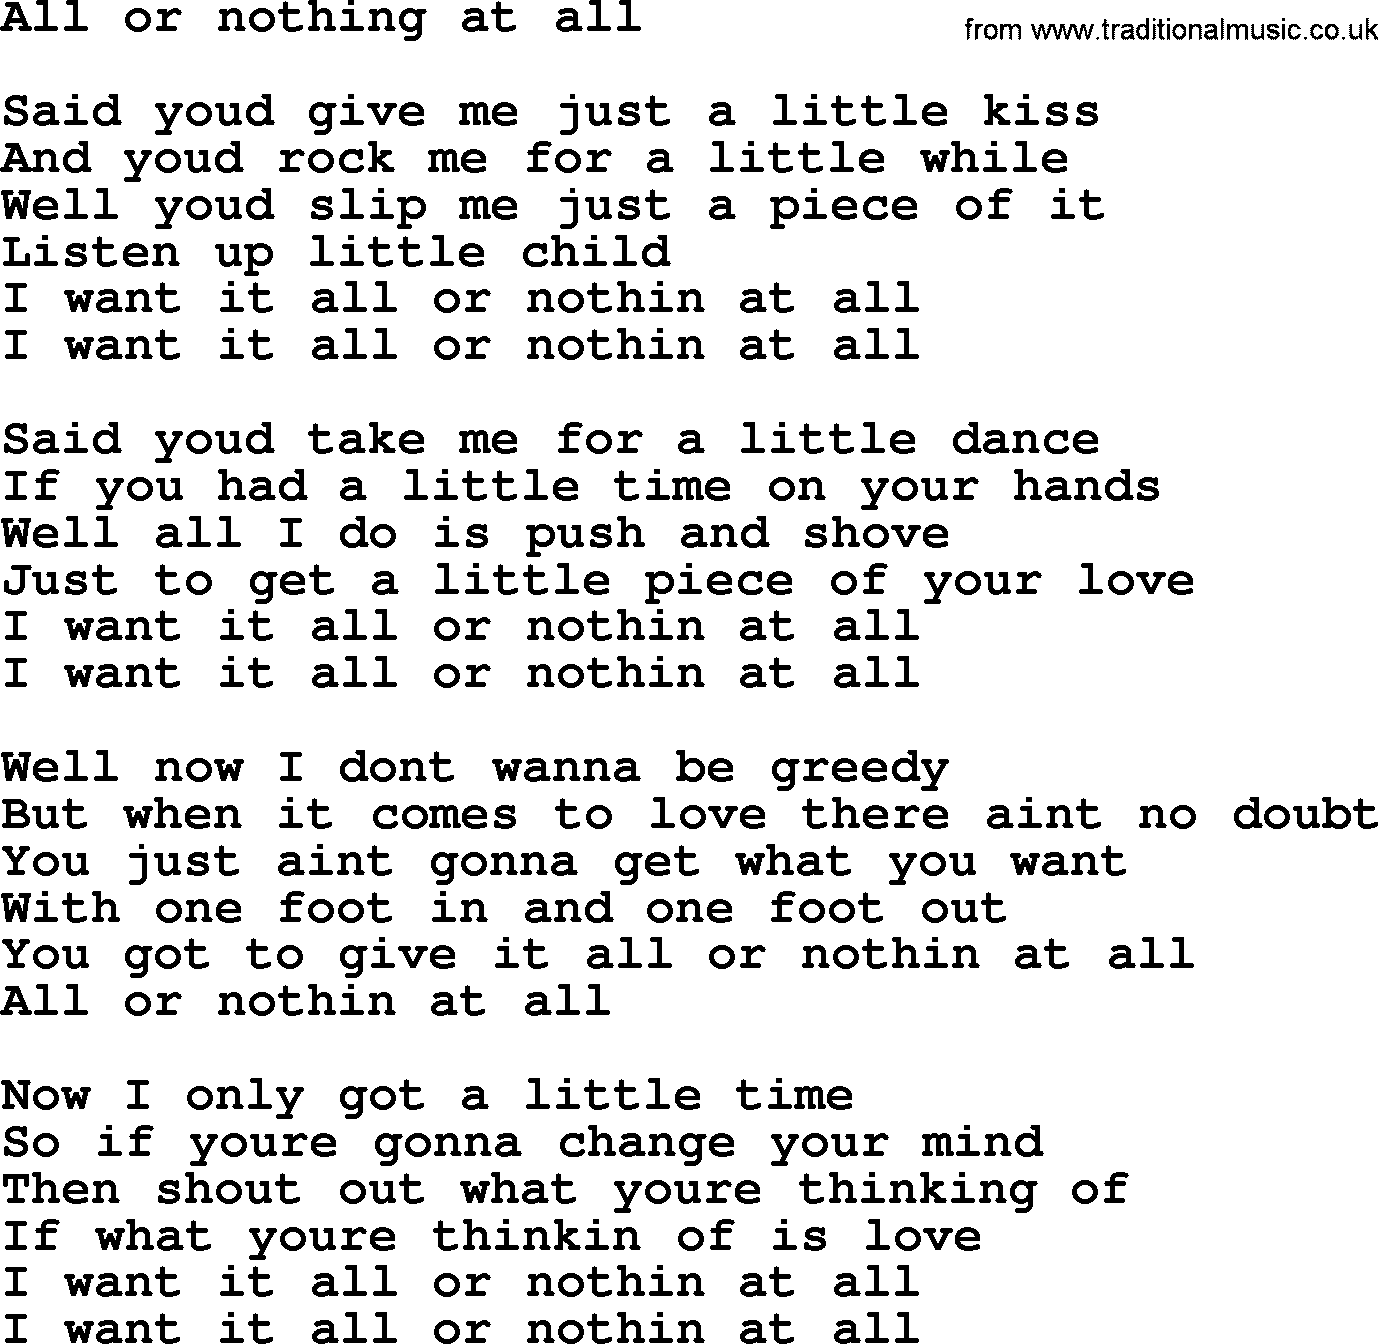 Bruce Springsteen song: All Or Nothing At All lyrics